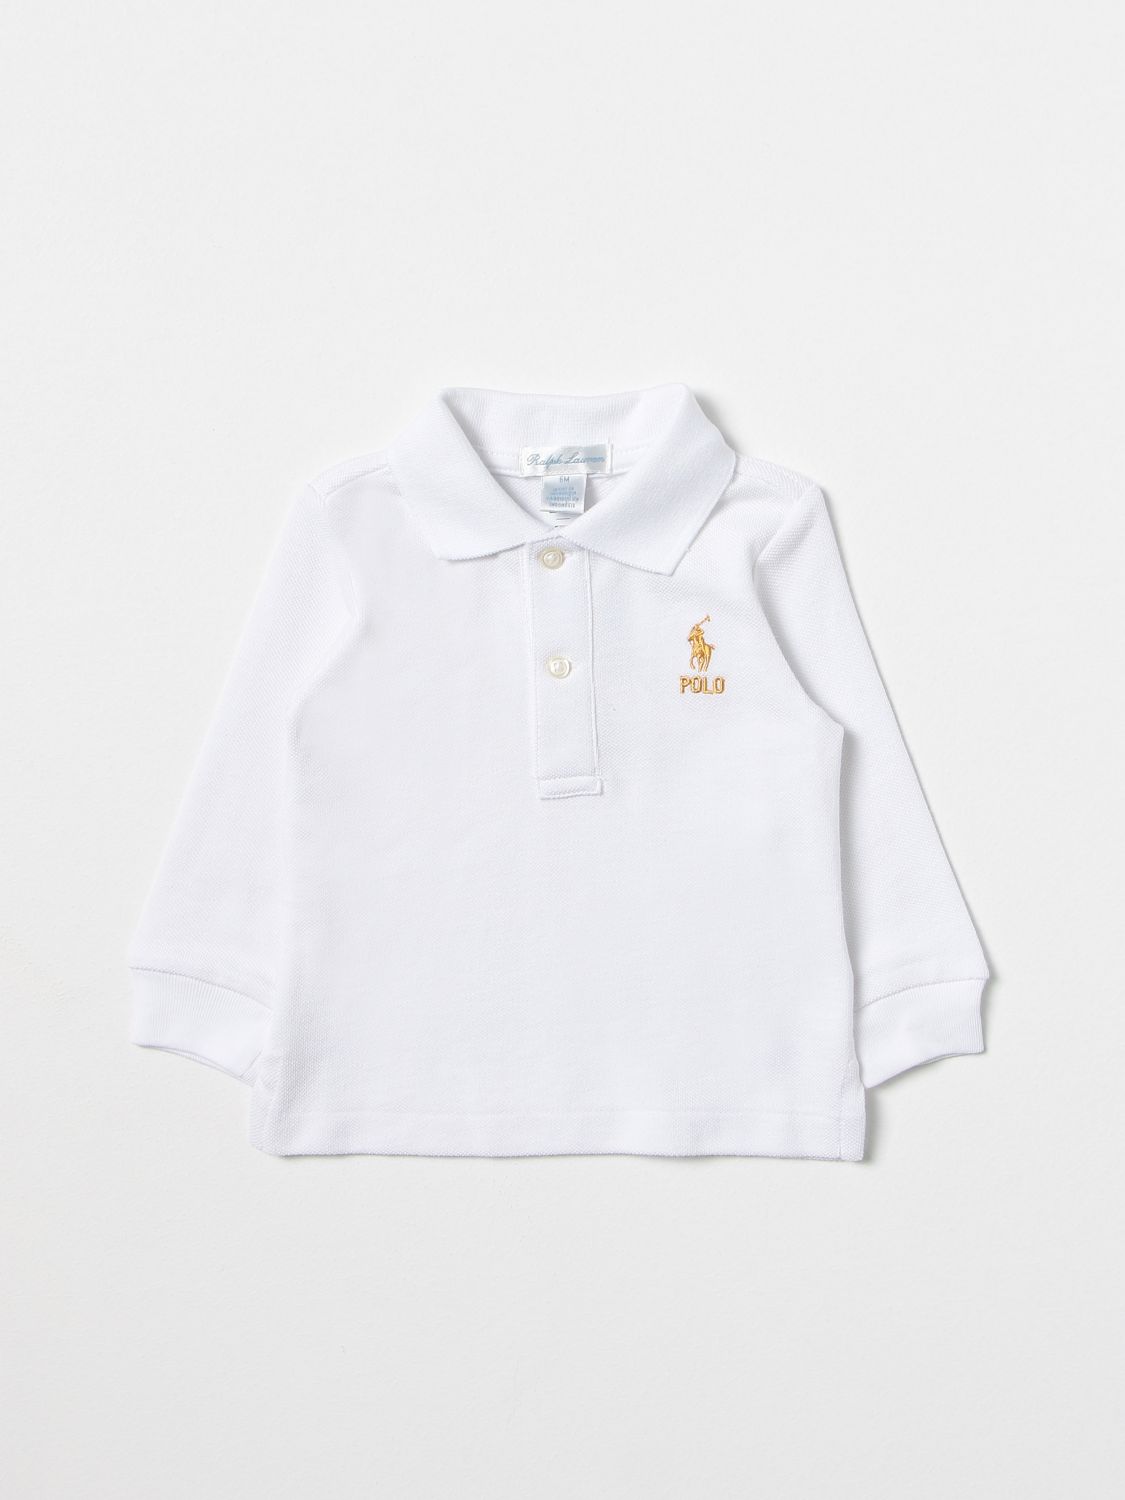 POLO RALPH LAUREN: t-shirt for baby - White | Polo Ralph Lauren t-shirt ...